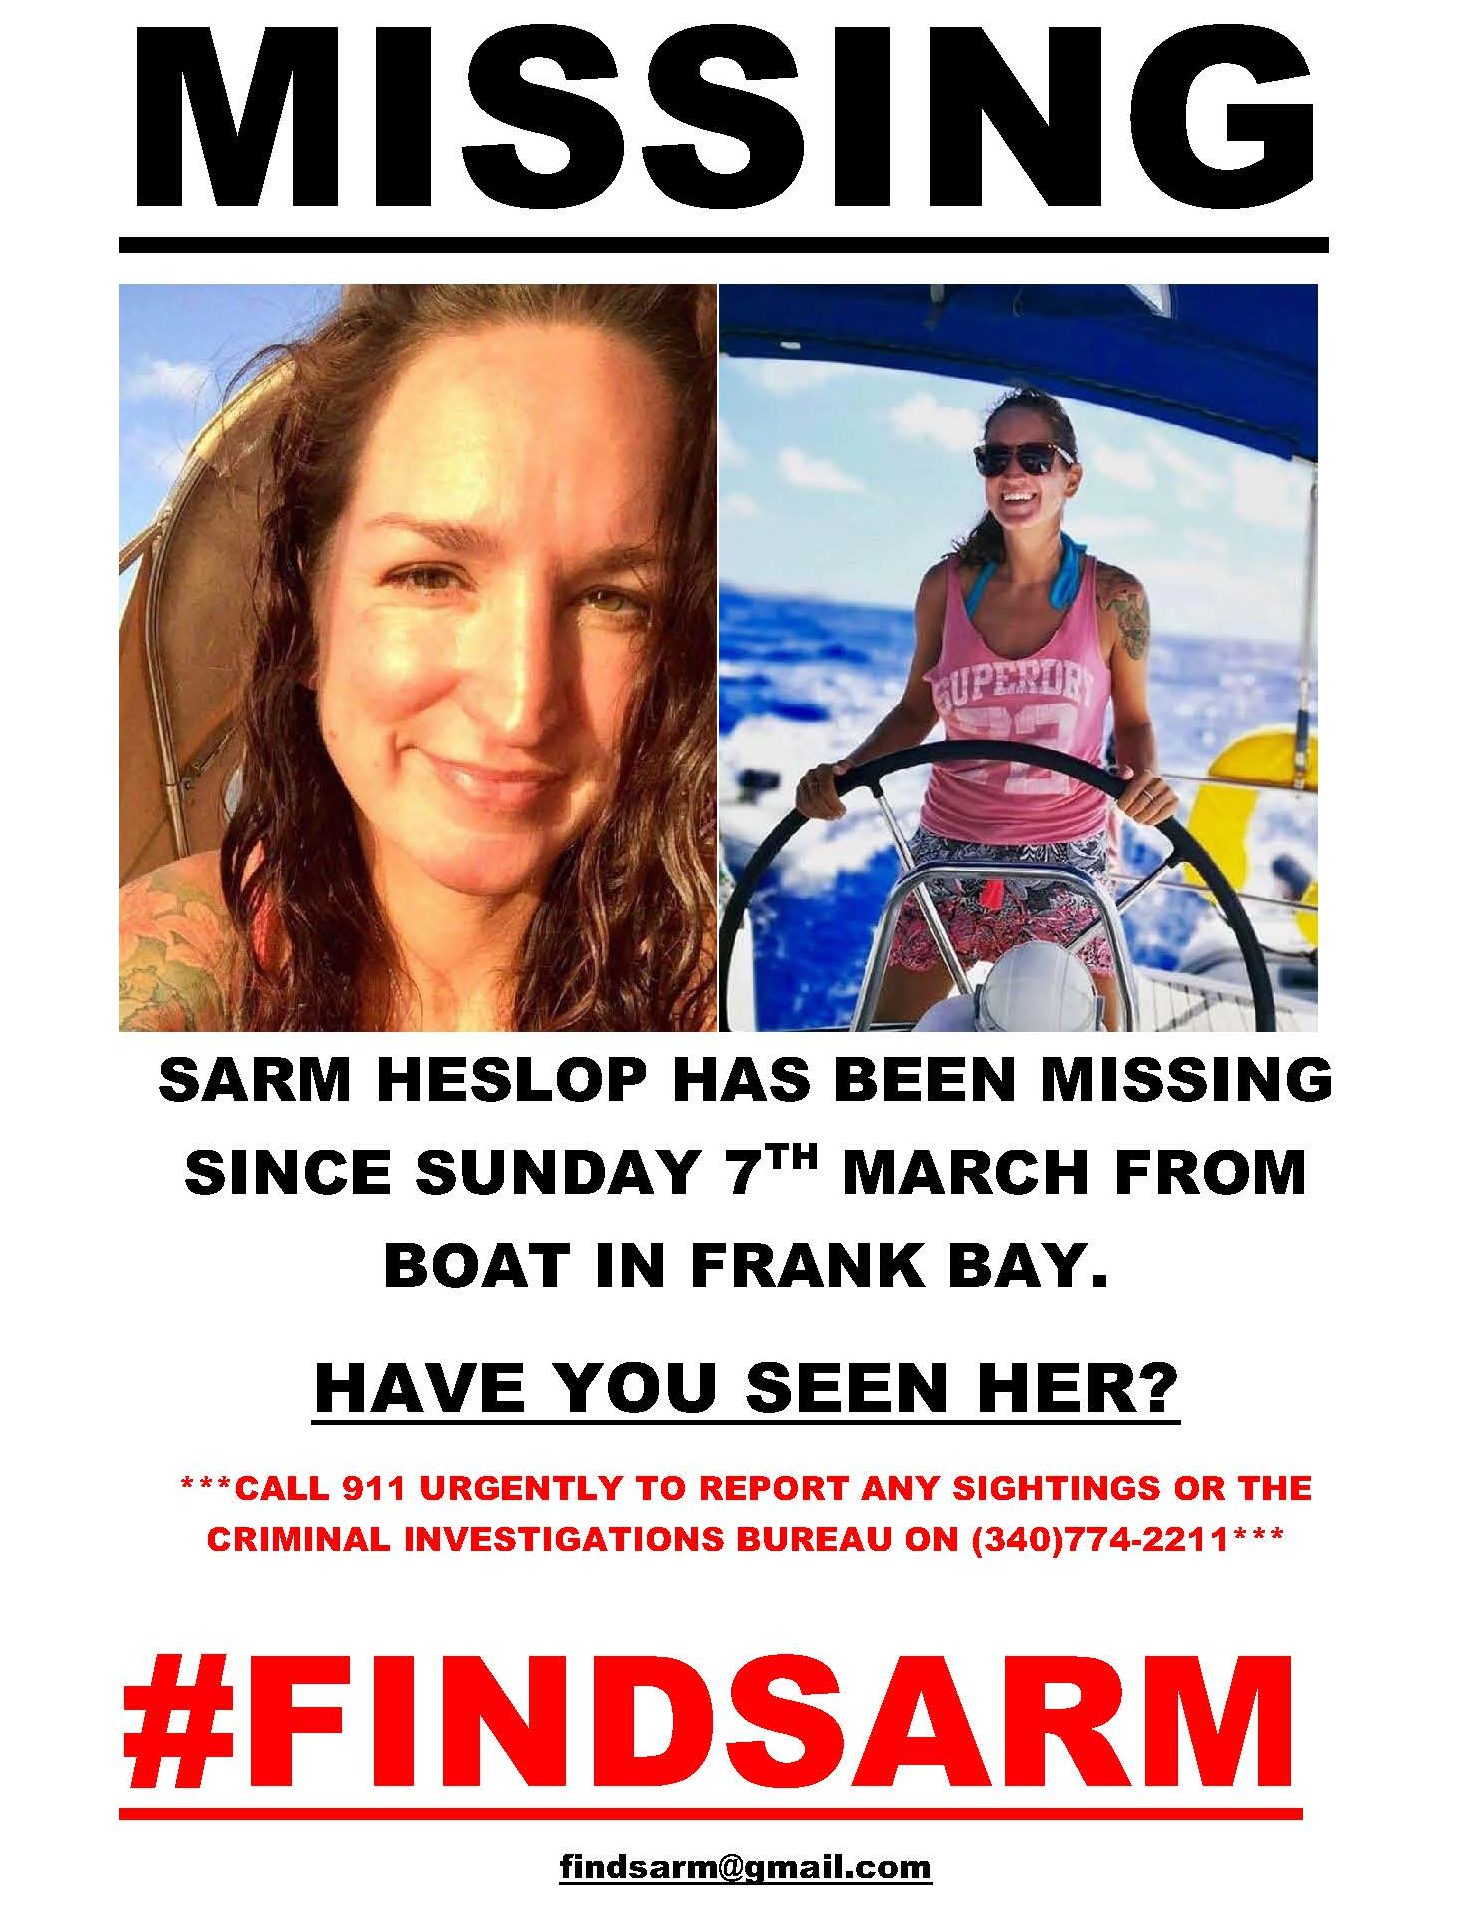 Sarm Heslop, the British woman who was reported missing from her boyfriend’s catamaran in Frank Bay, St. John, on March 8, 2021. (Poster courtesy of the Heslop family)